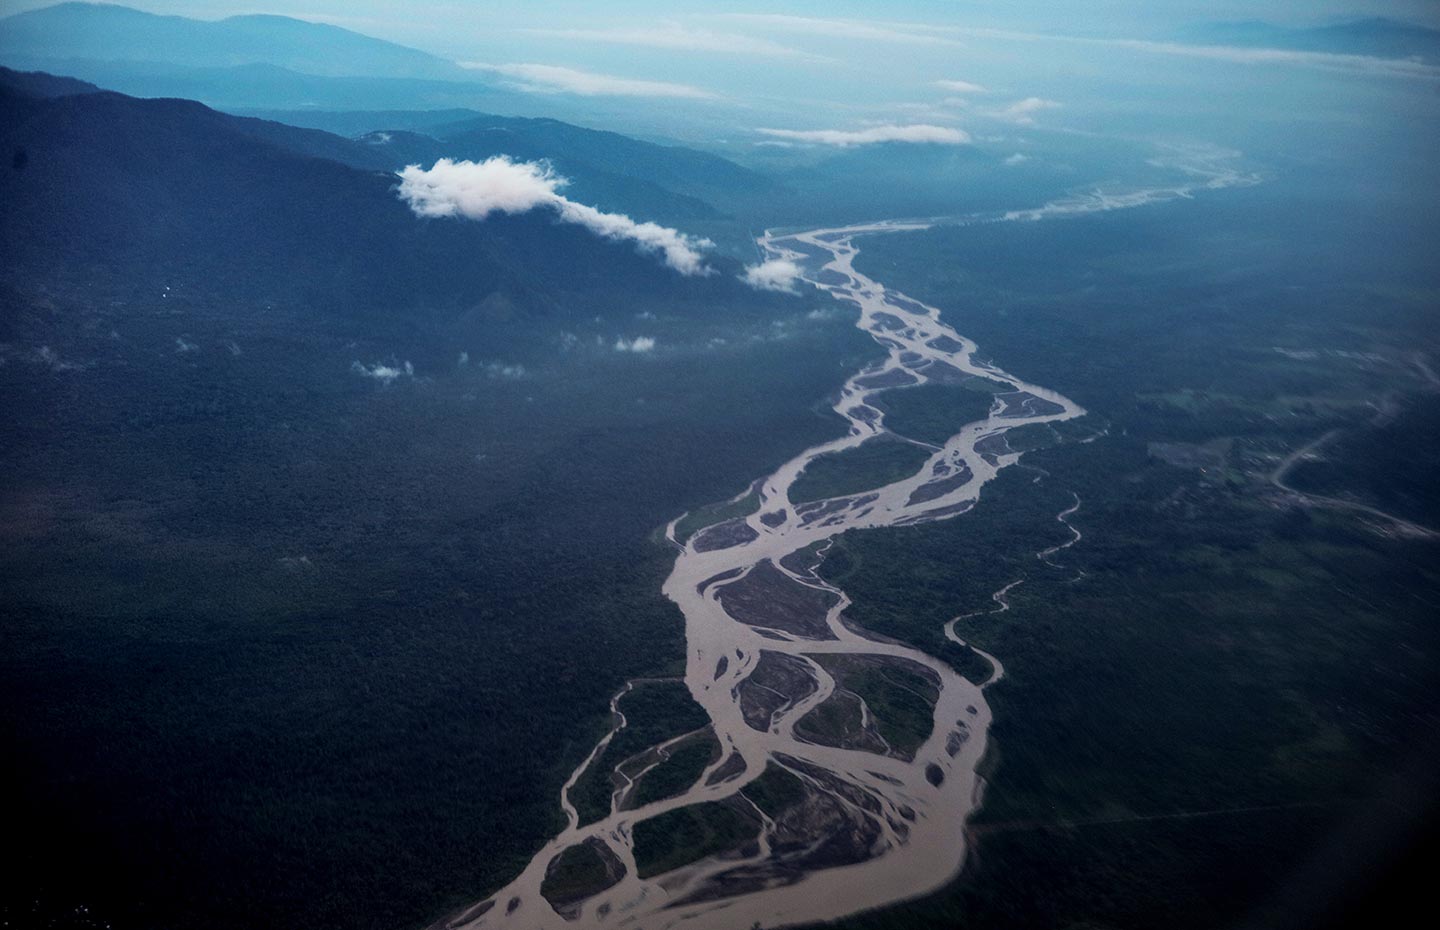 Gavi/2018/AAPIMAGE-Brendan Esposito - View from the air in Lae, Marobe Province, Papua New Guinea,